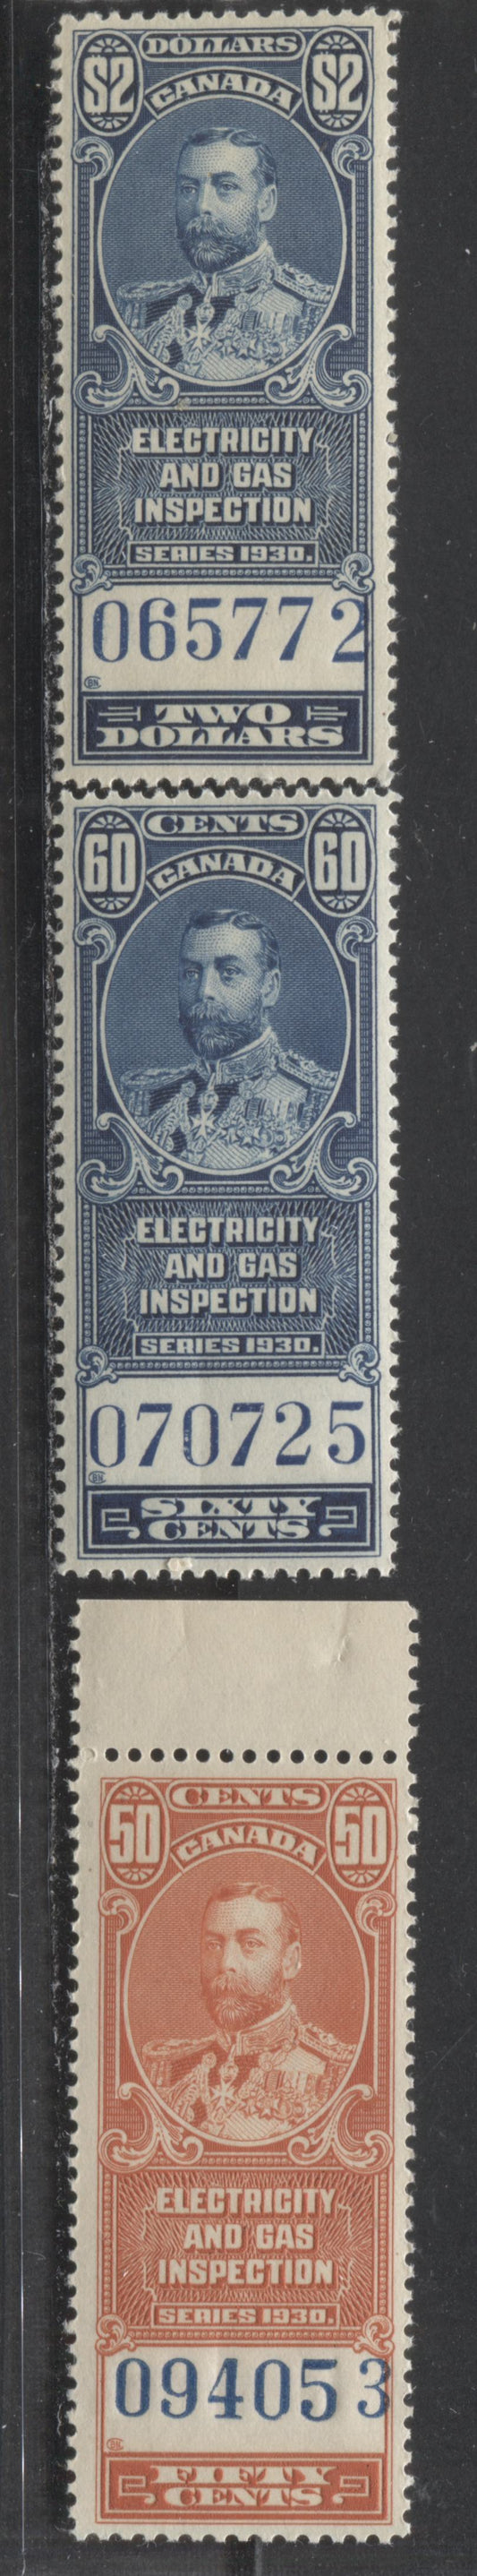 Lot 66 Canada #FEG1, 8, 9 50c, 60c & $2 Vermillion & Blue King George V, 1930 Electricity & Gas Inspection Issue, 3 VFNH Singles With Blue Control Numbers